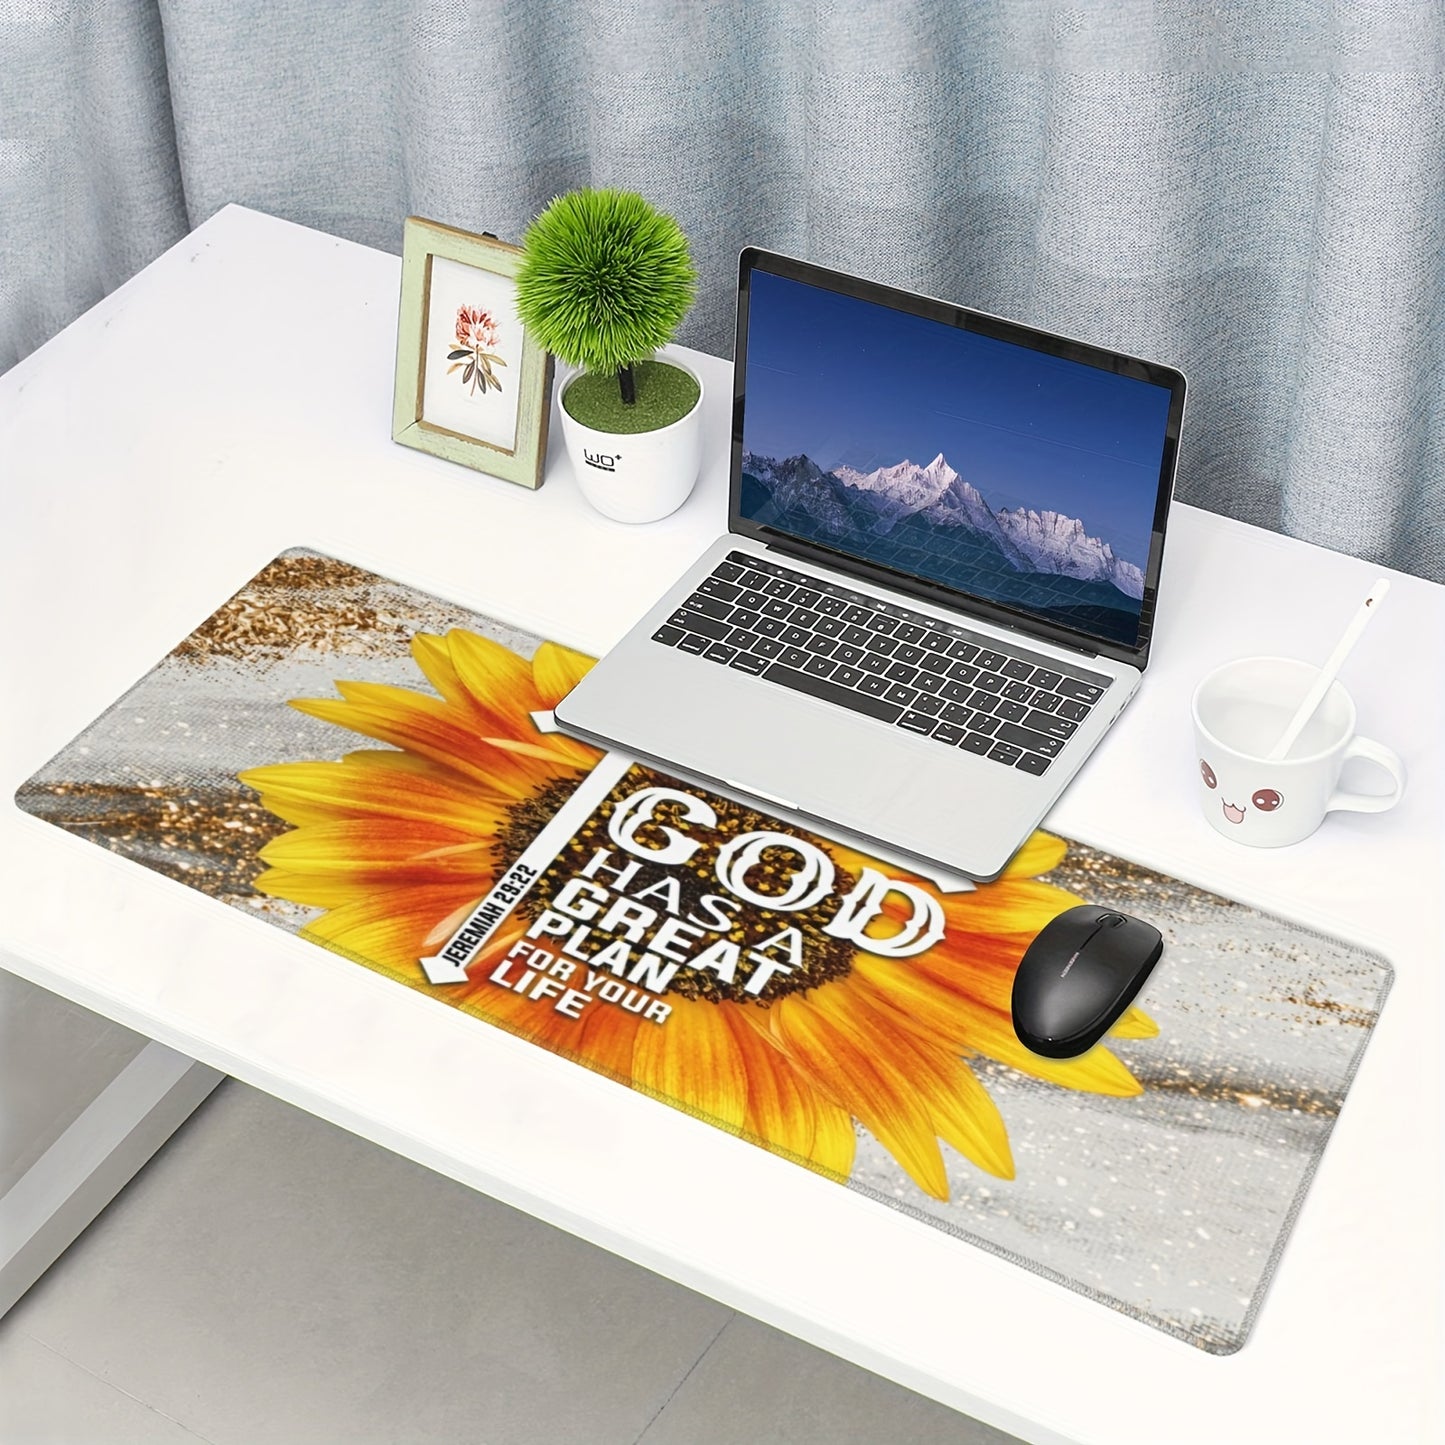 God Has A Great Plan For Your Life Christian Computer Keyboard Mouse Pad 11.8x31.5in claimedbygoddesigns